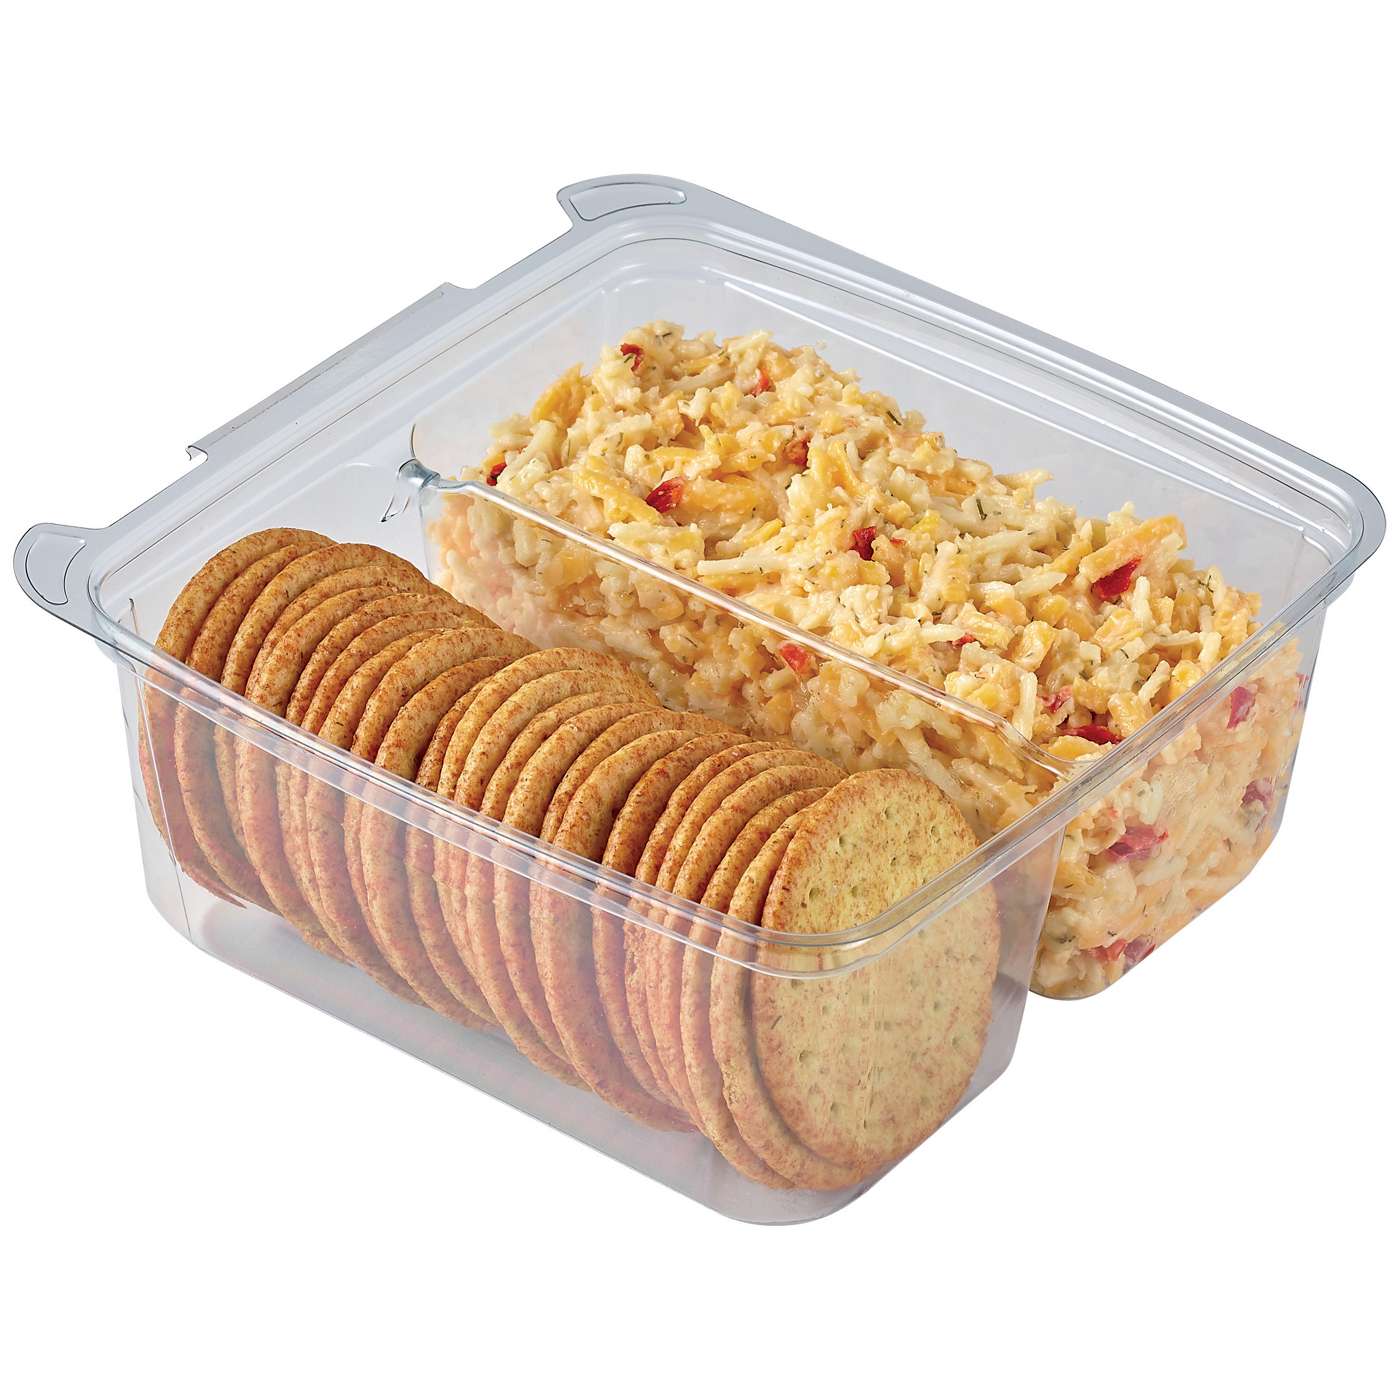 Meal Simple by H-E-B Pimento Cheese Spread & Crackers; image 1 of 3